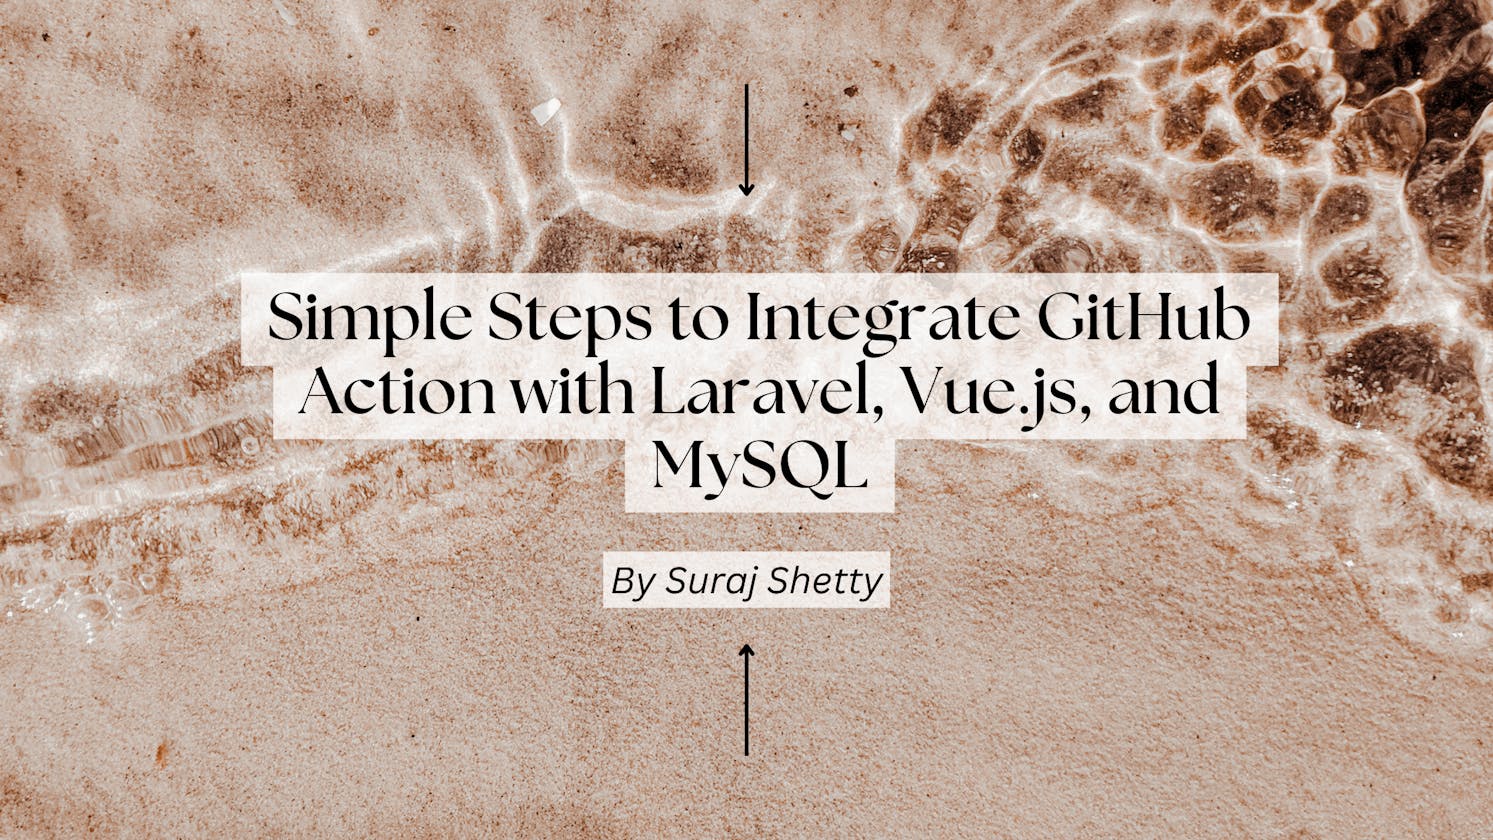 Simple Steps to Integrate GitHub Action with Laravel, Vue.js, and MySQL